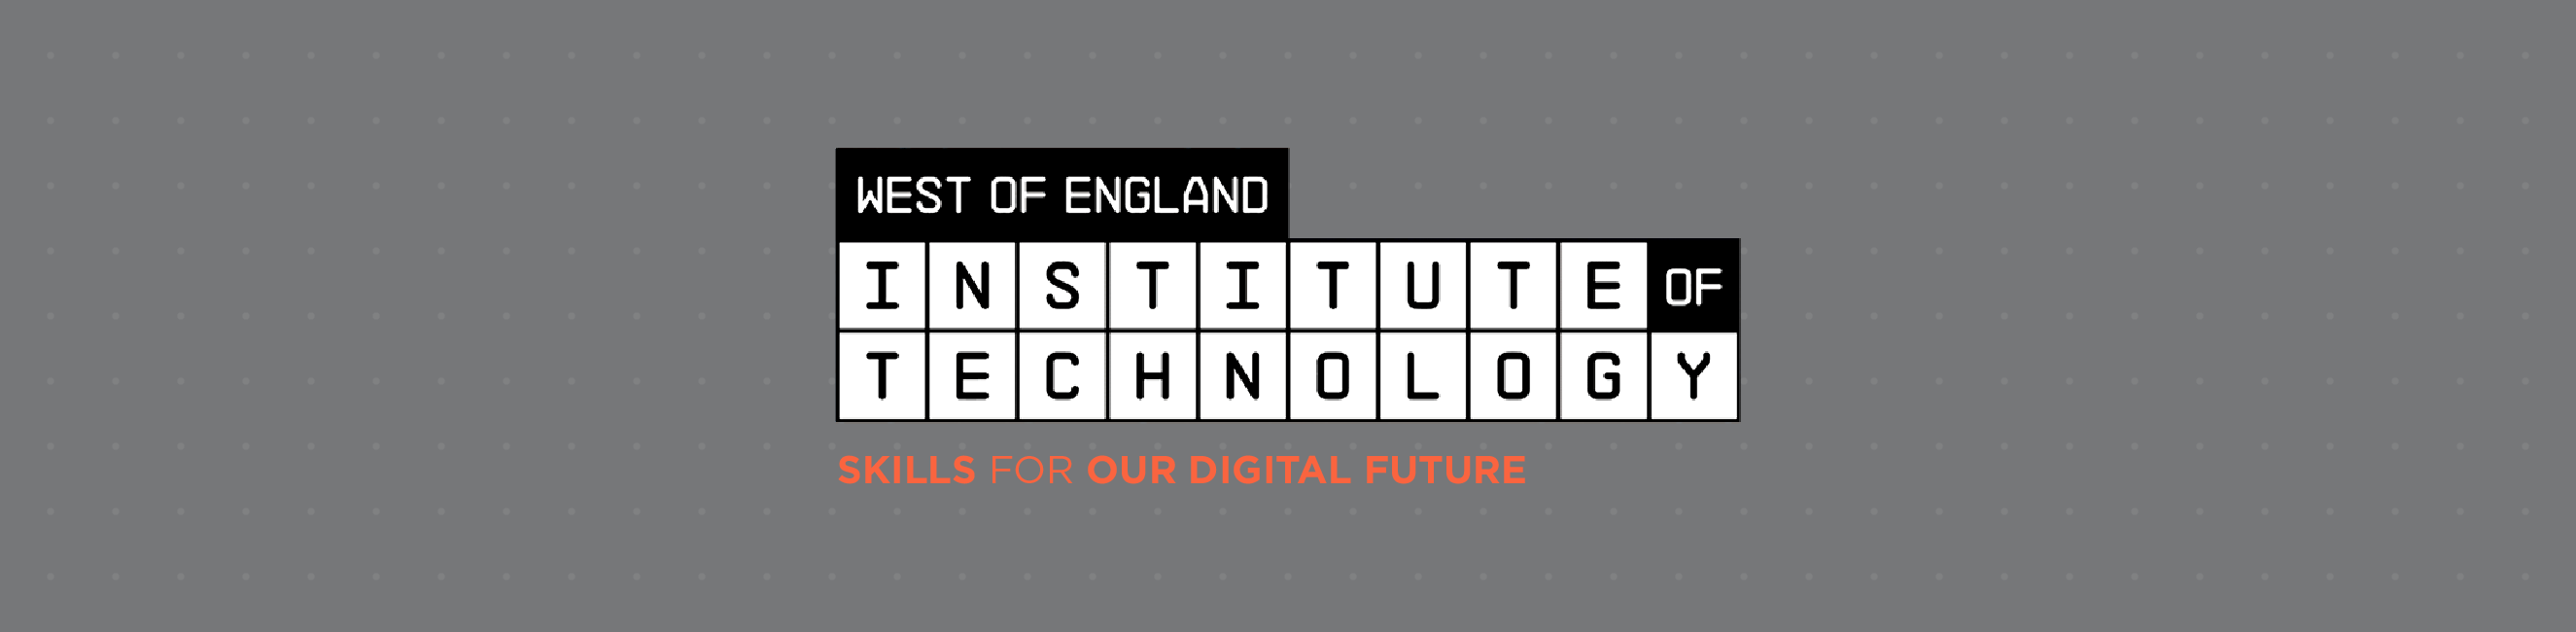 West of England Institute of Technology, WEIoT, IoT, Future Skills